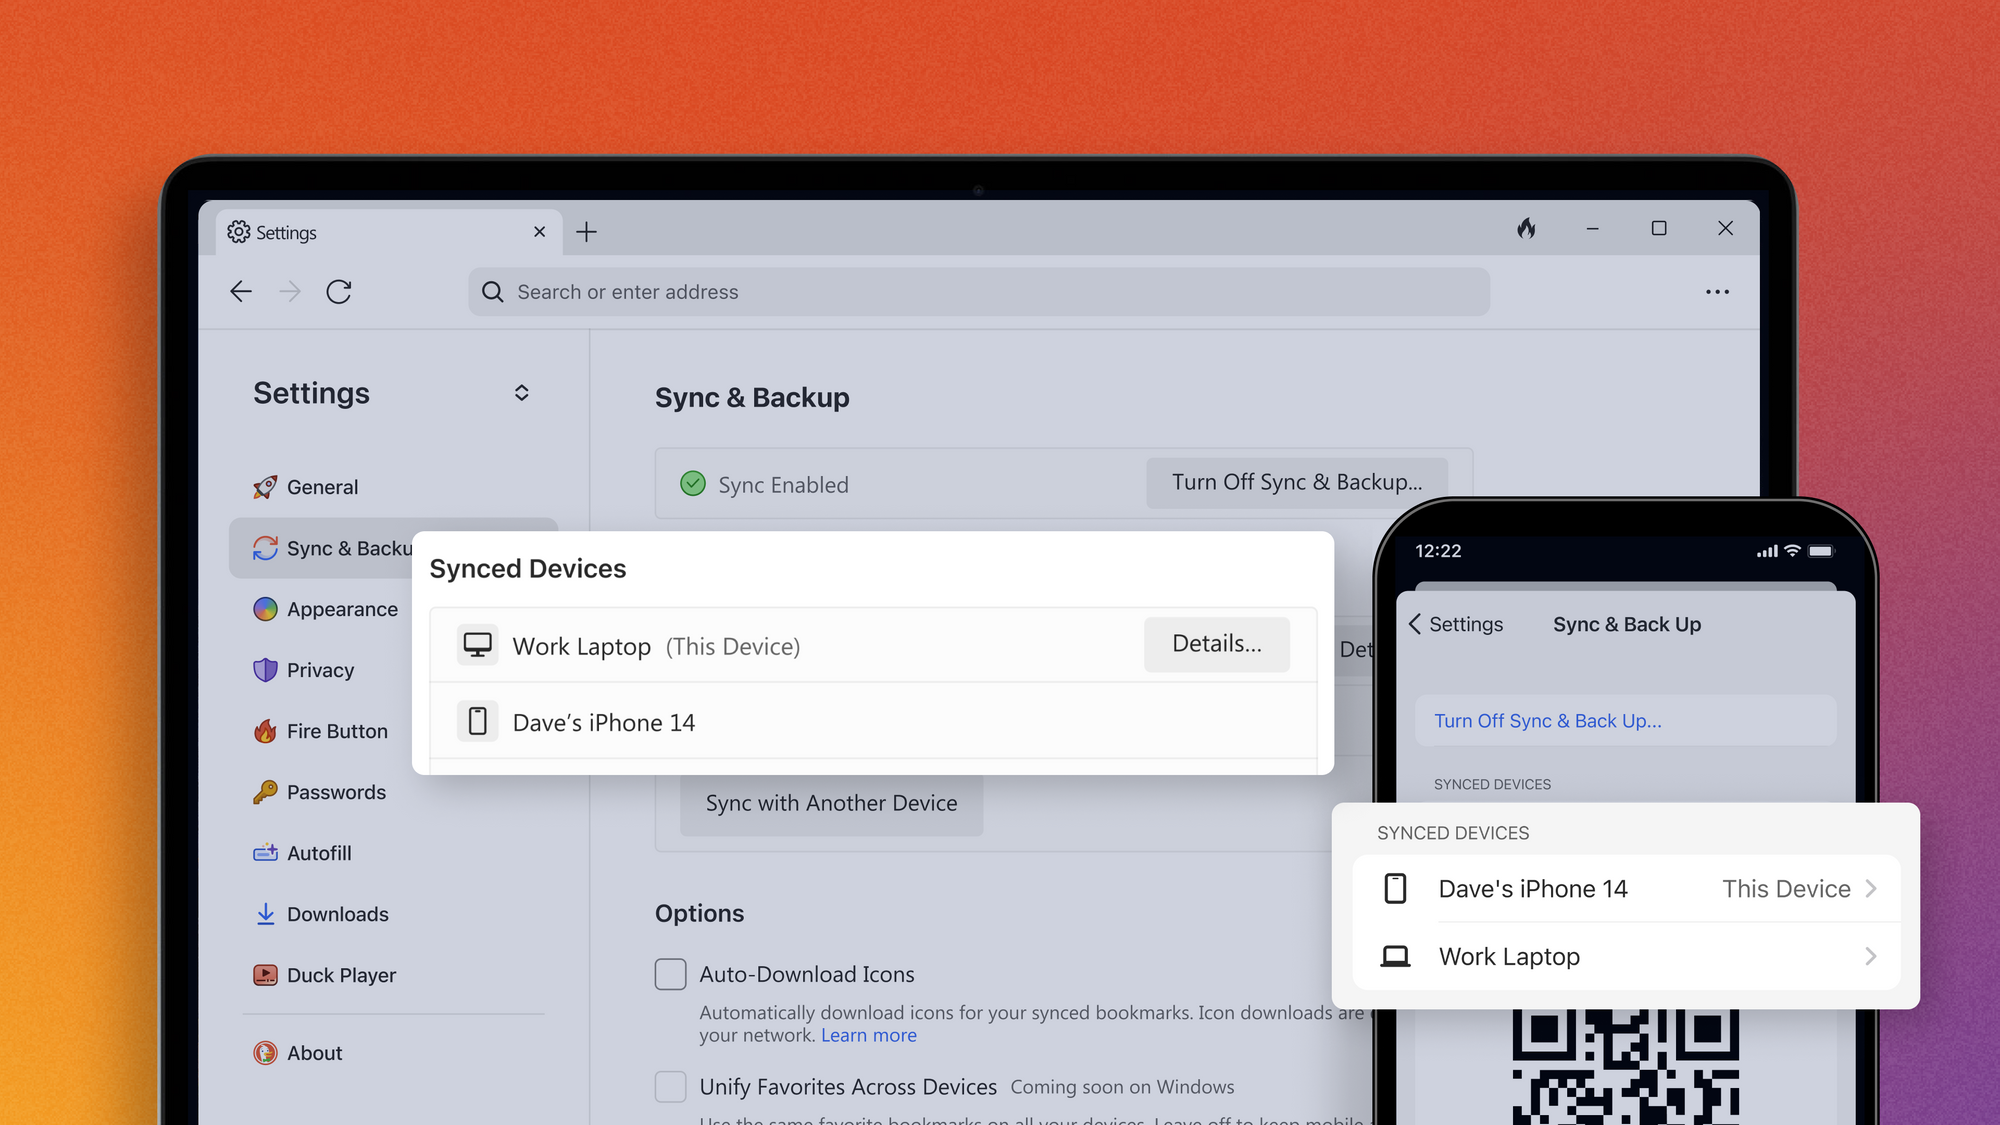 DuckDuckGo browser upgrade: Privately sync your bookmarks and passwords across devices